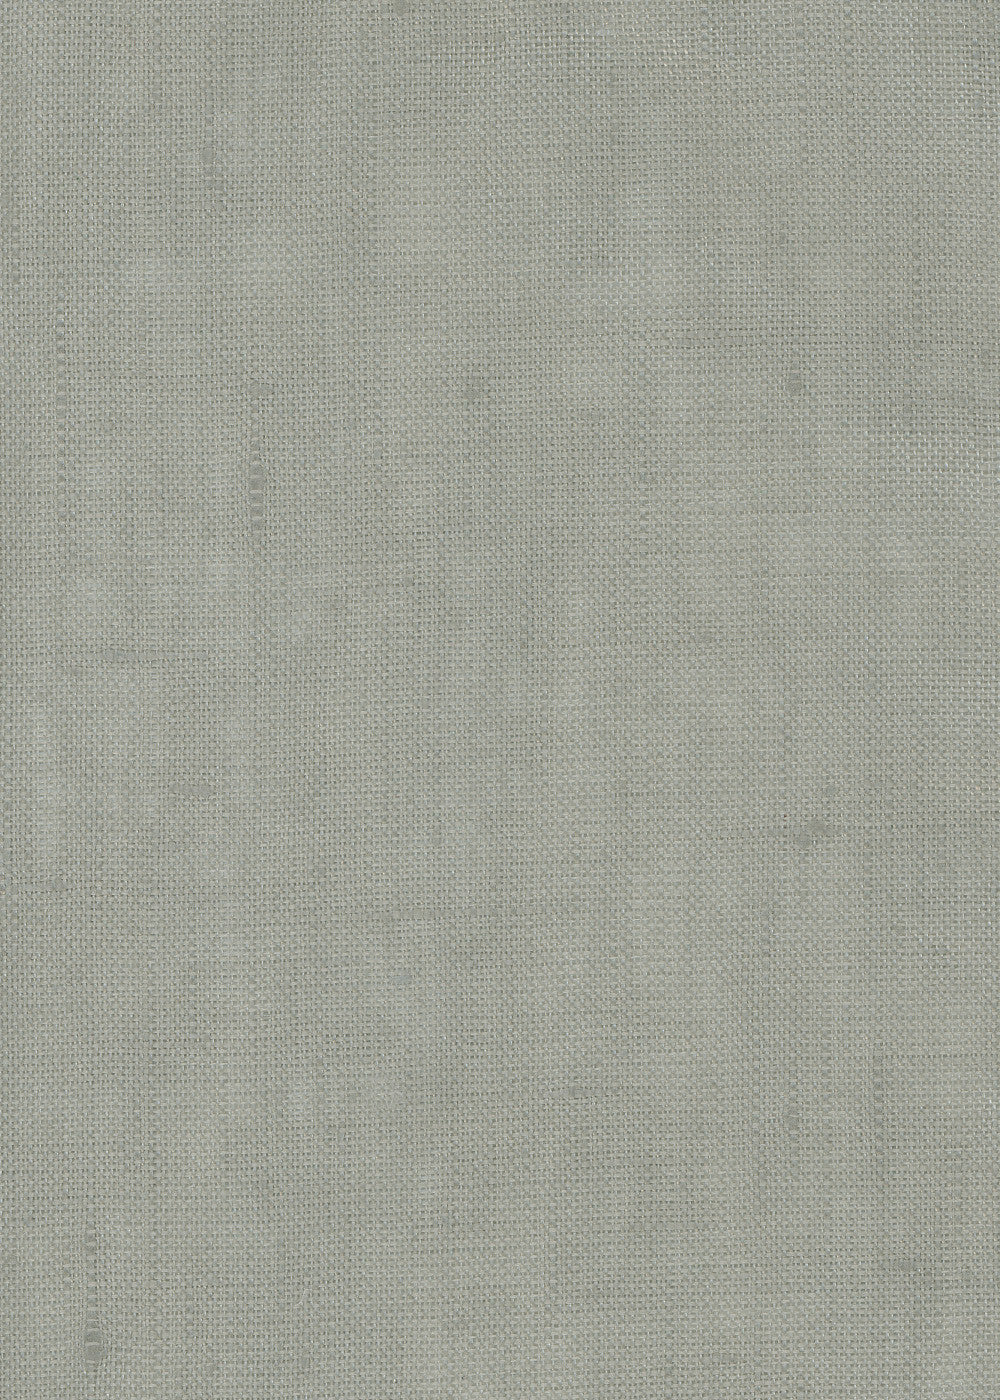 pale grey fabric that is glazed